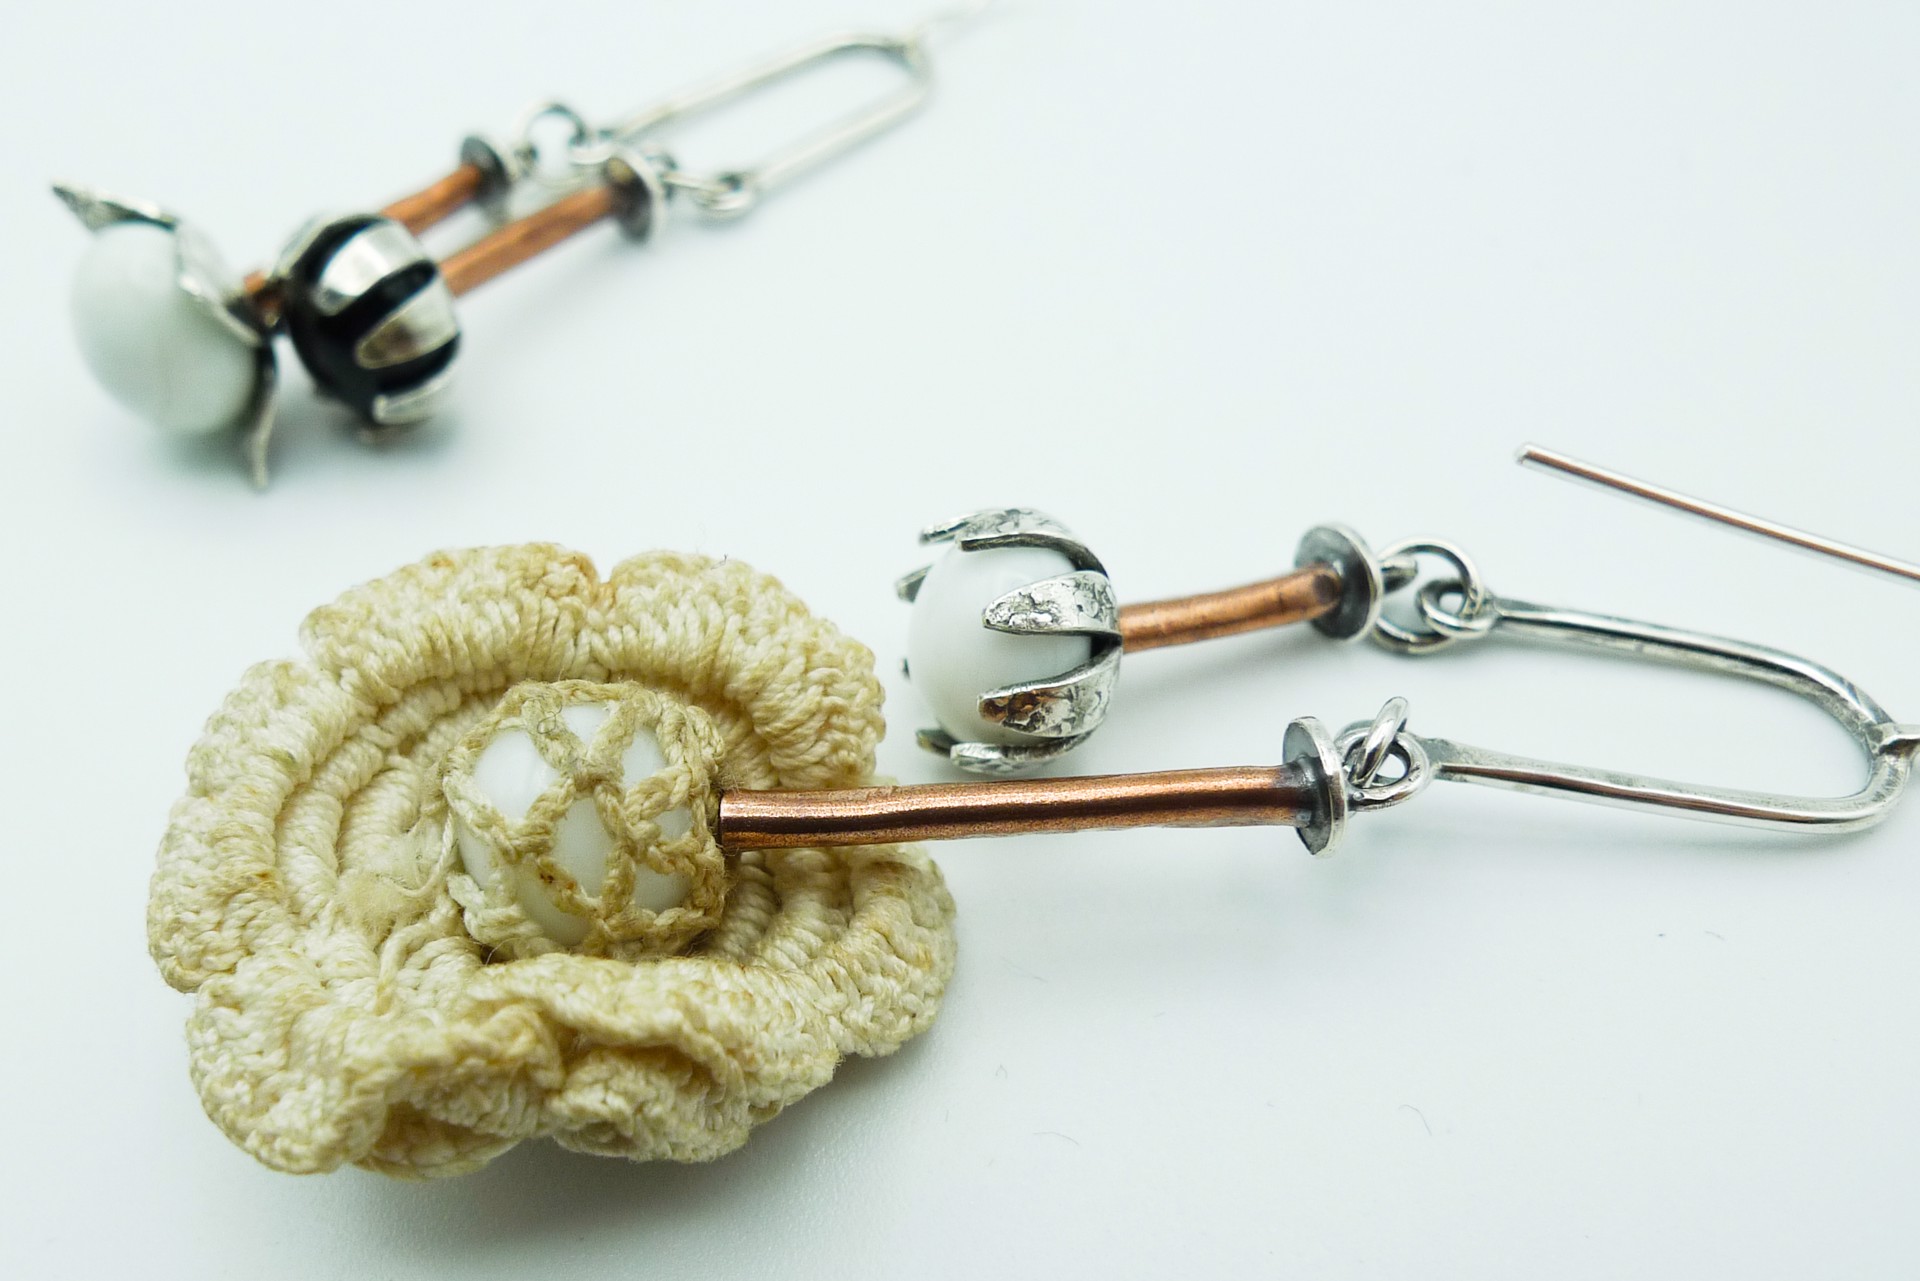 From Hair to Ear Antique Hat Pin Adornments by Ali Kauss